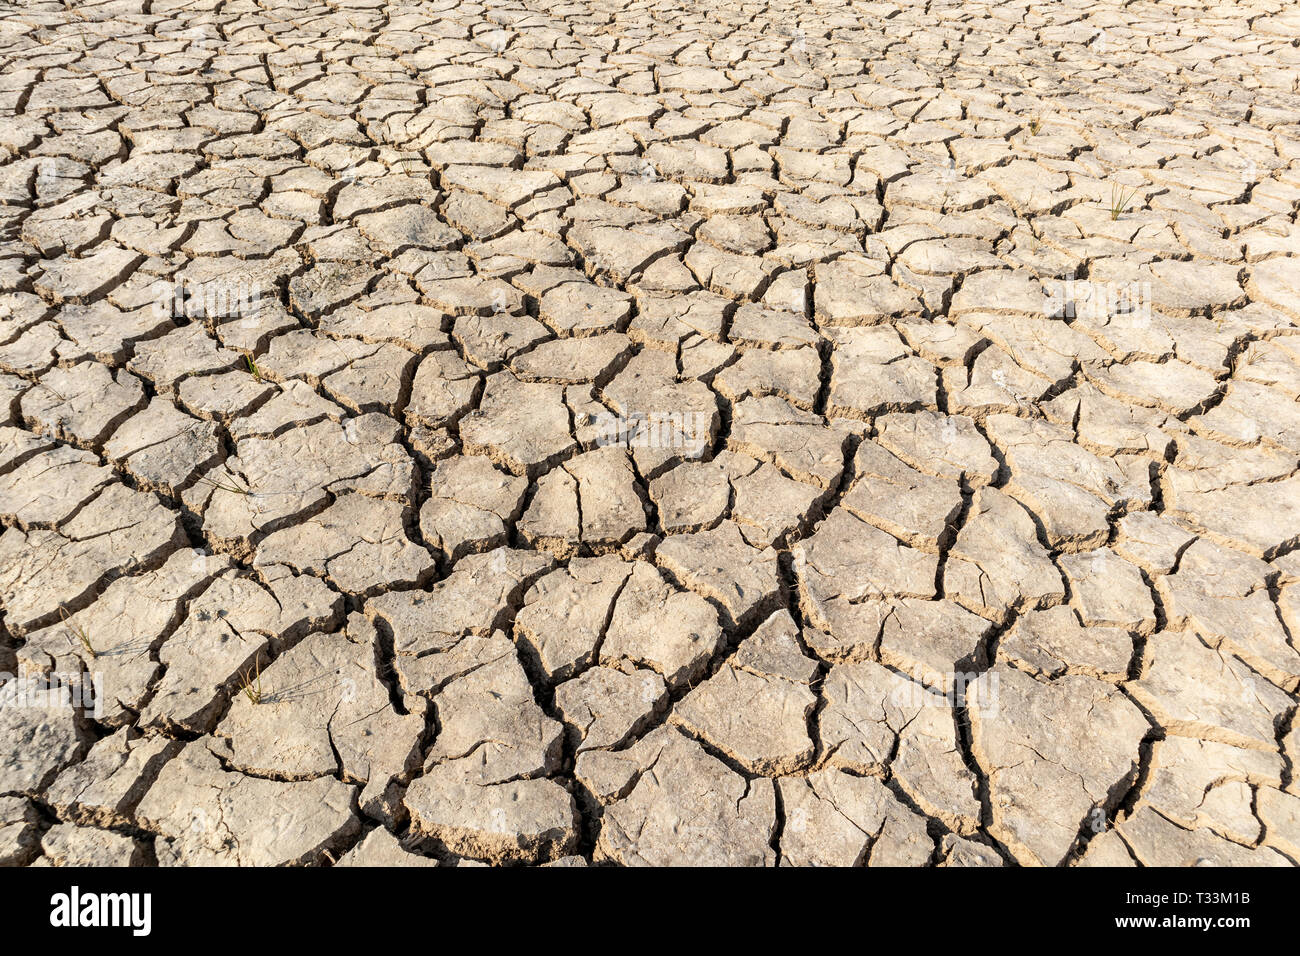 Barren land, Dry soil in arid areas background and texture. Stock Photo